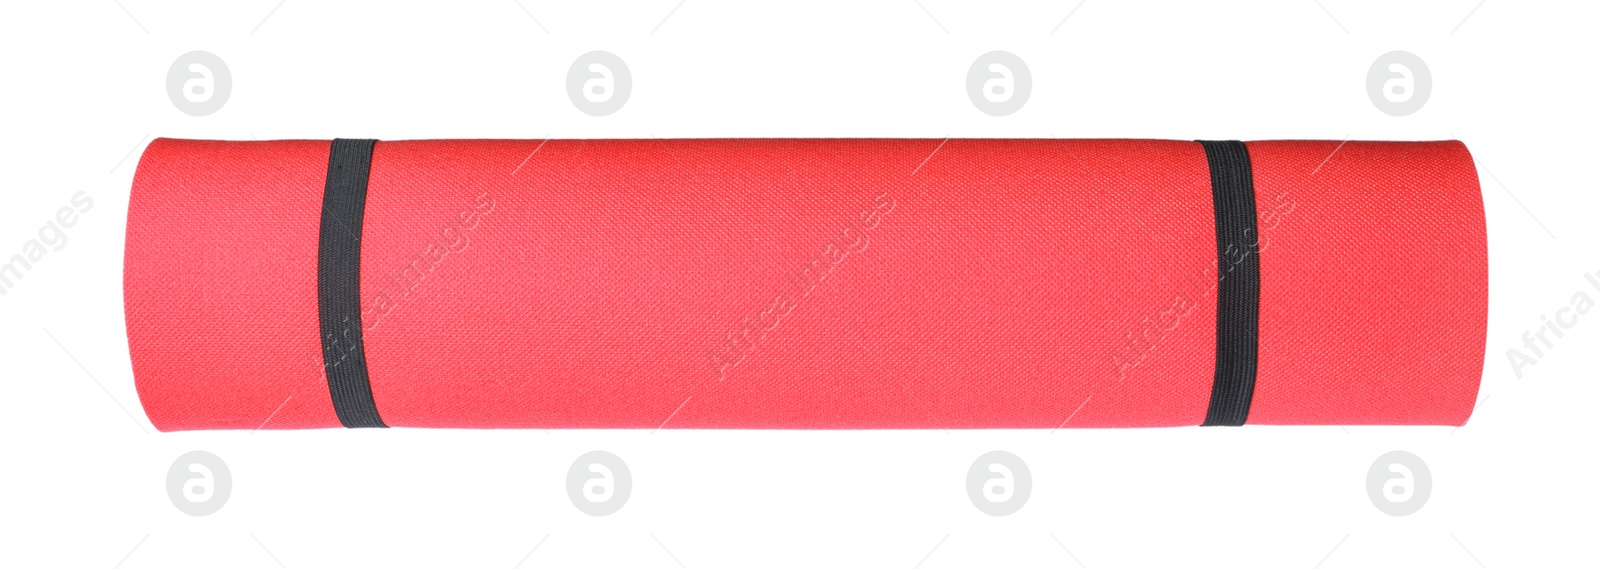 Photo of Red rolled camping or exercise mat on white background, top view